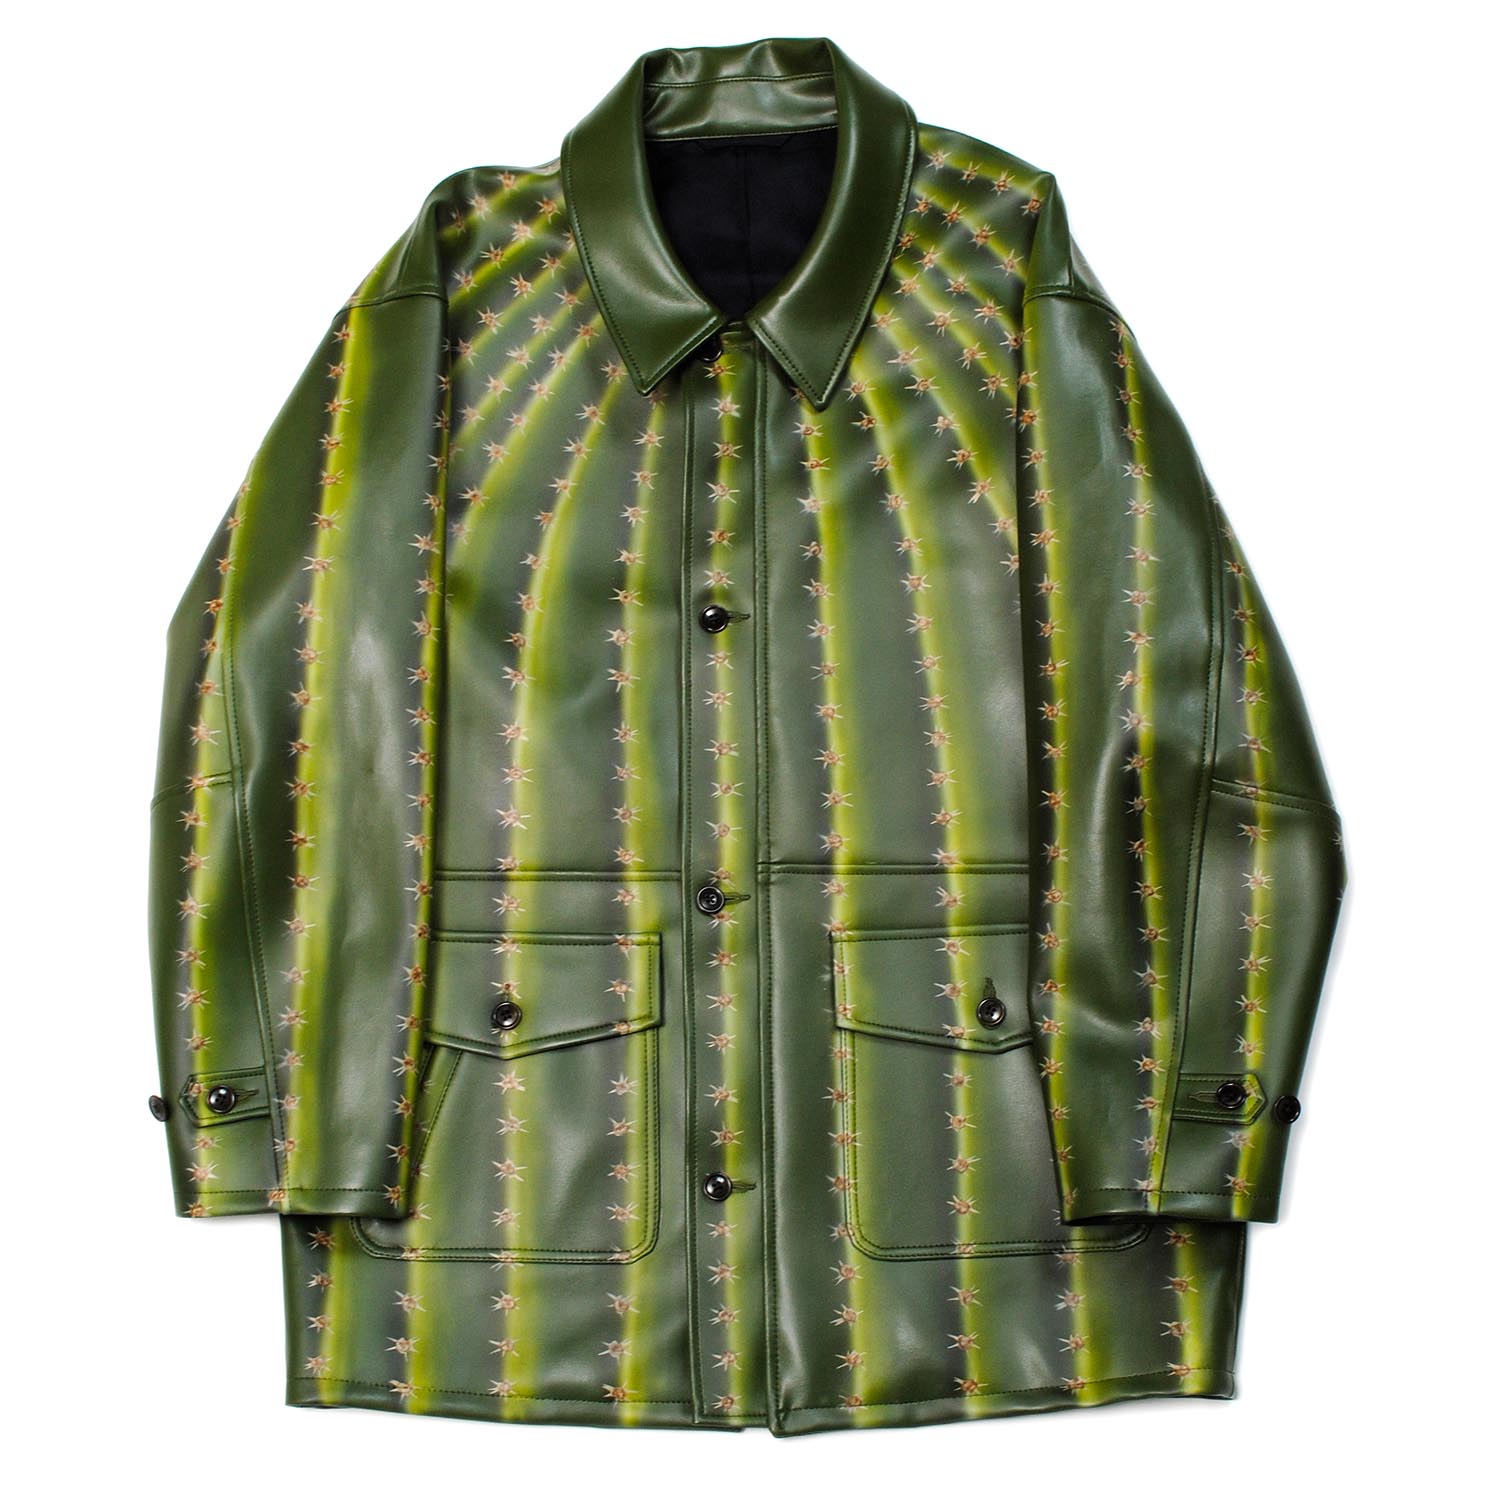 Green Cactus Leather Hand-Painted Jacket